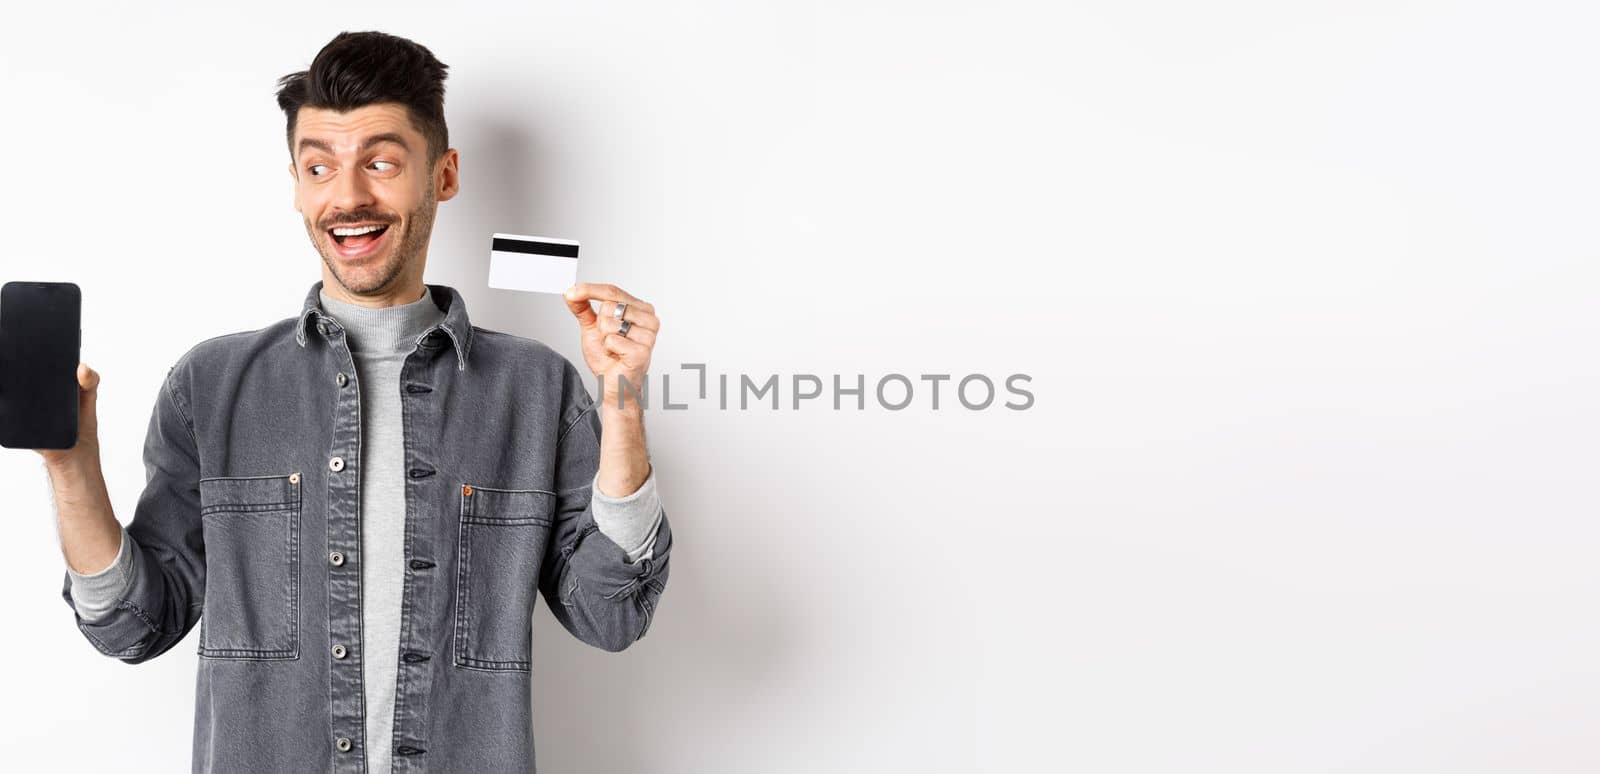 Handsome smiling man in denim jacket looking at empty smartphone screen and showing plastic credit card, good internet offer, standing against white background.